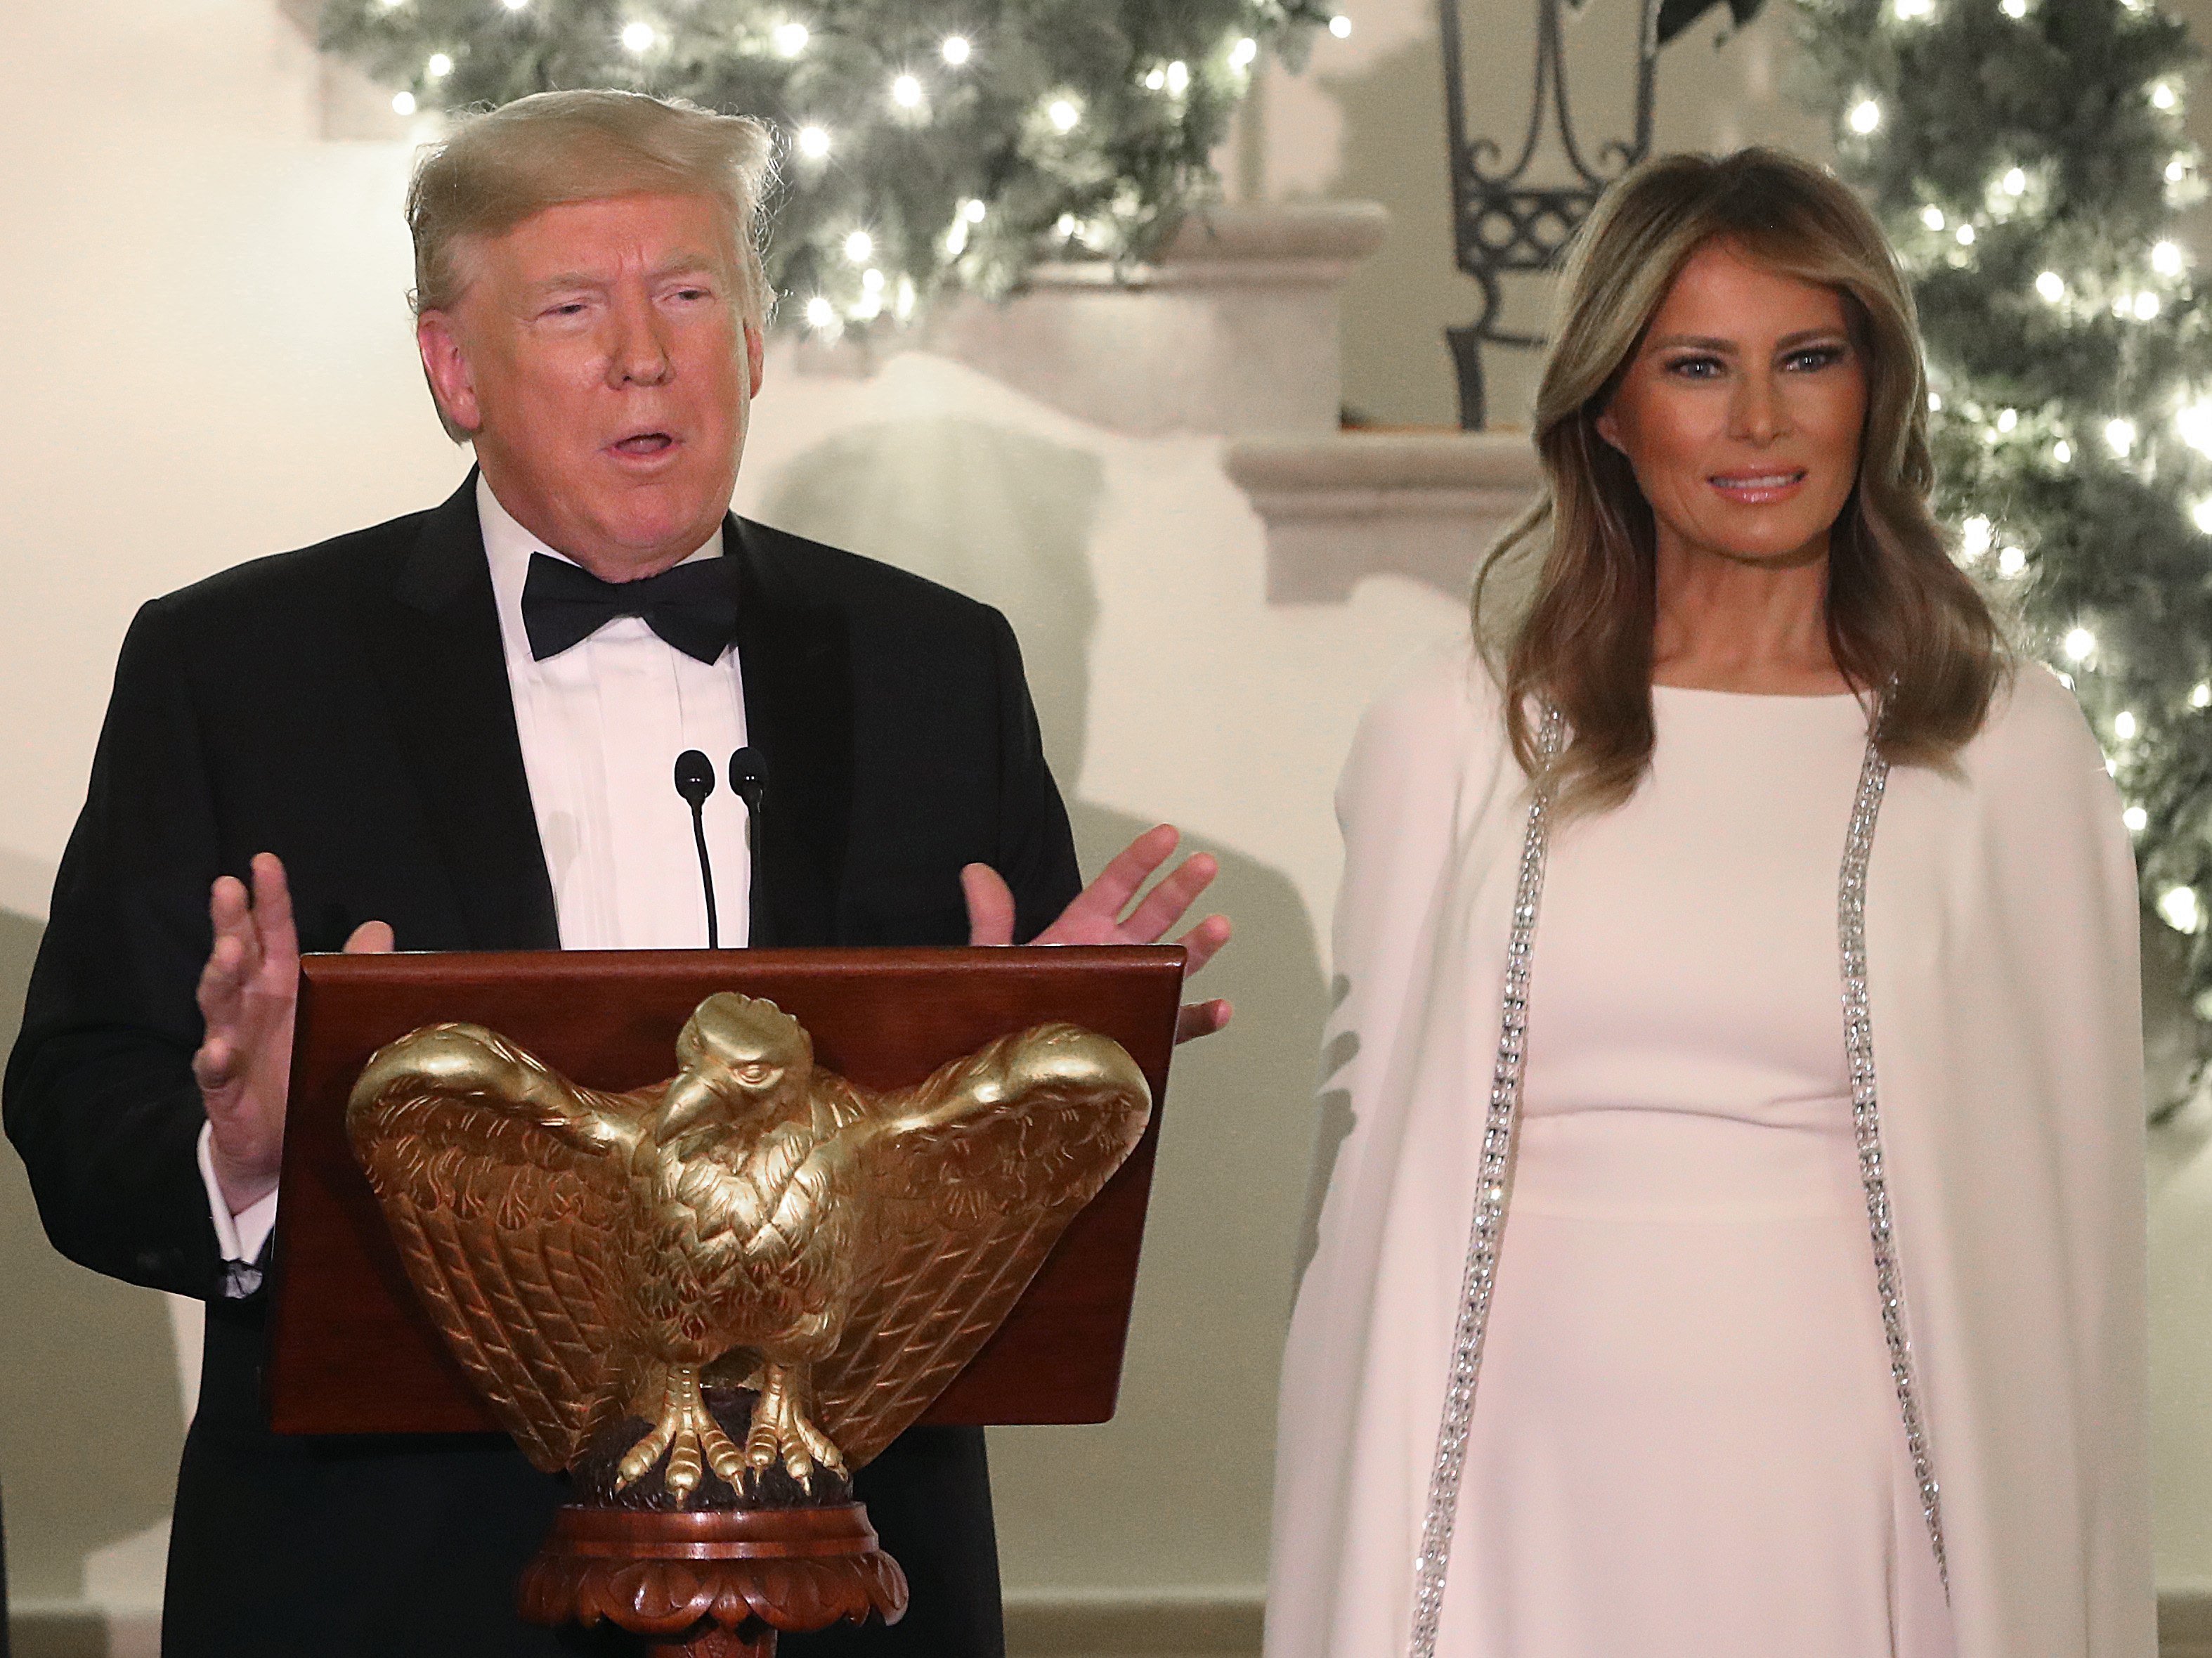 U.S. President Donald Trump speaks as first lady Melania Trump (R), Vice President Mike Pence and his wife Karen Pence look on during a Congressional Ball in the Grand Foyer of the White House on December 12, 2019 in Washington, DC. | Photo: Getty Images